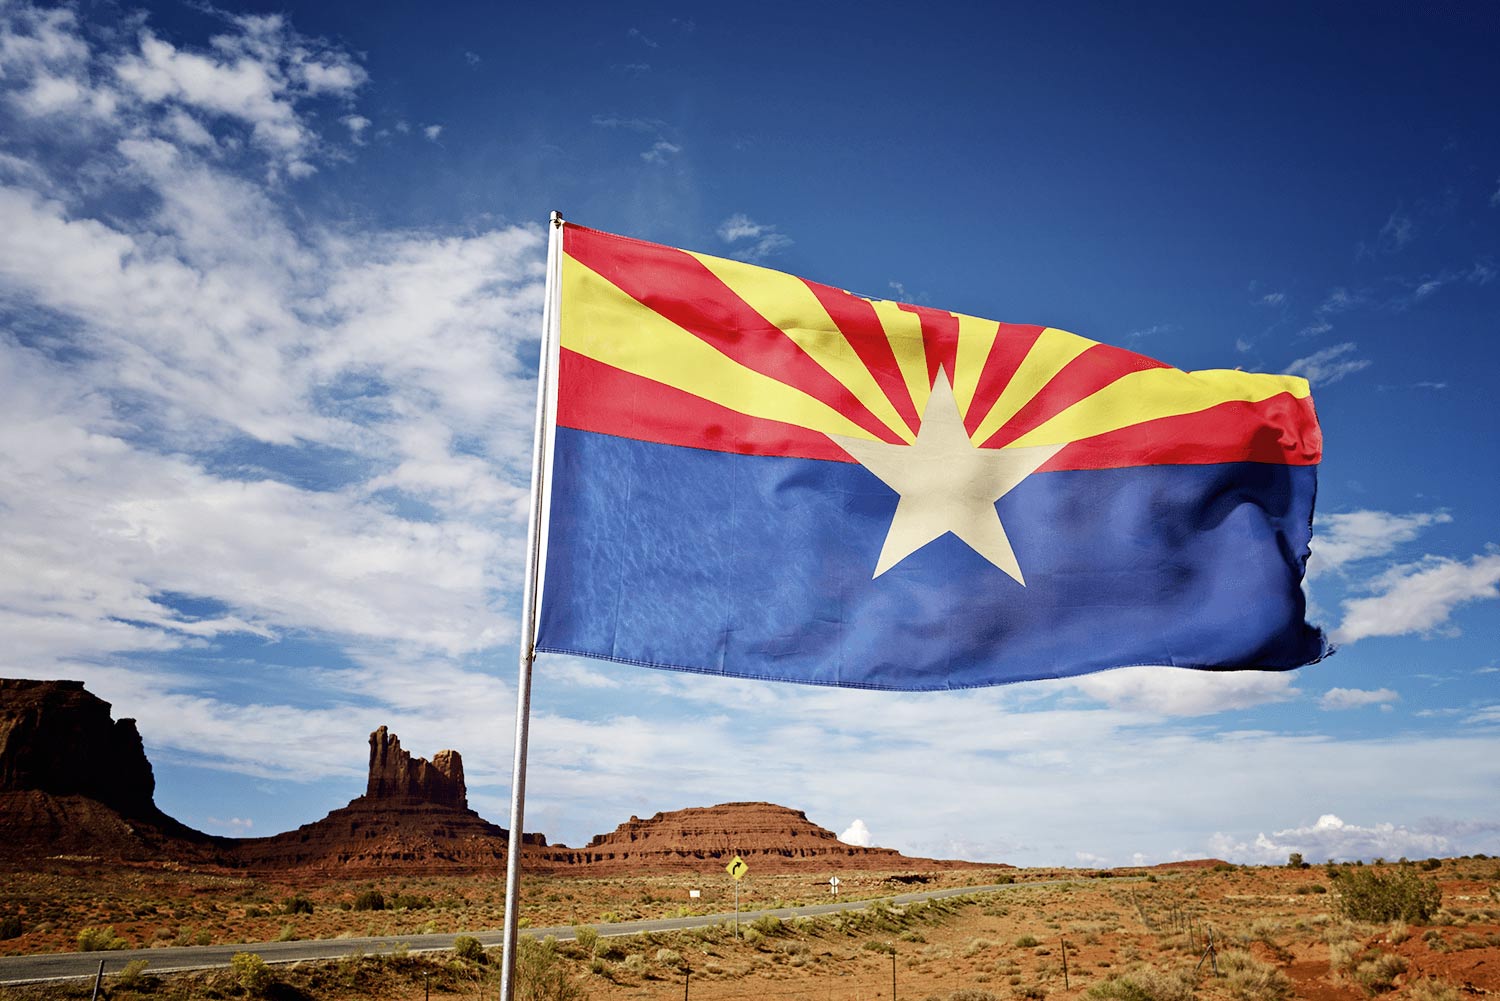 Health Insurance in Arizona: Find the Best Plan for Your Needs